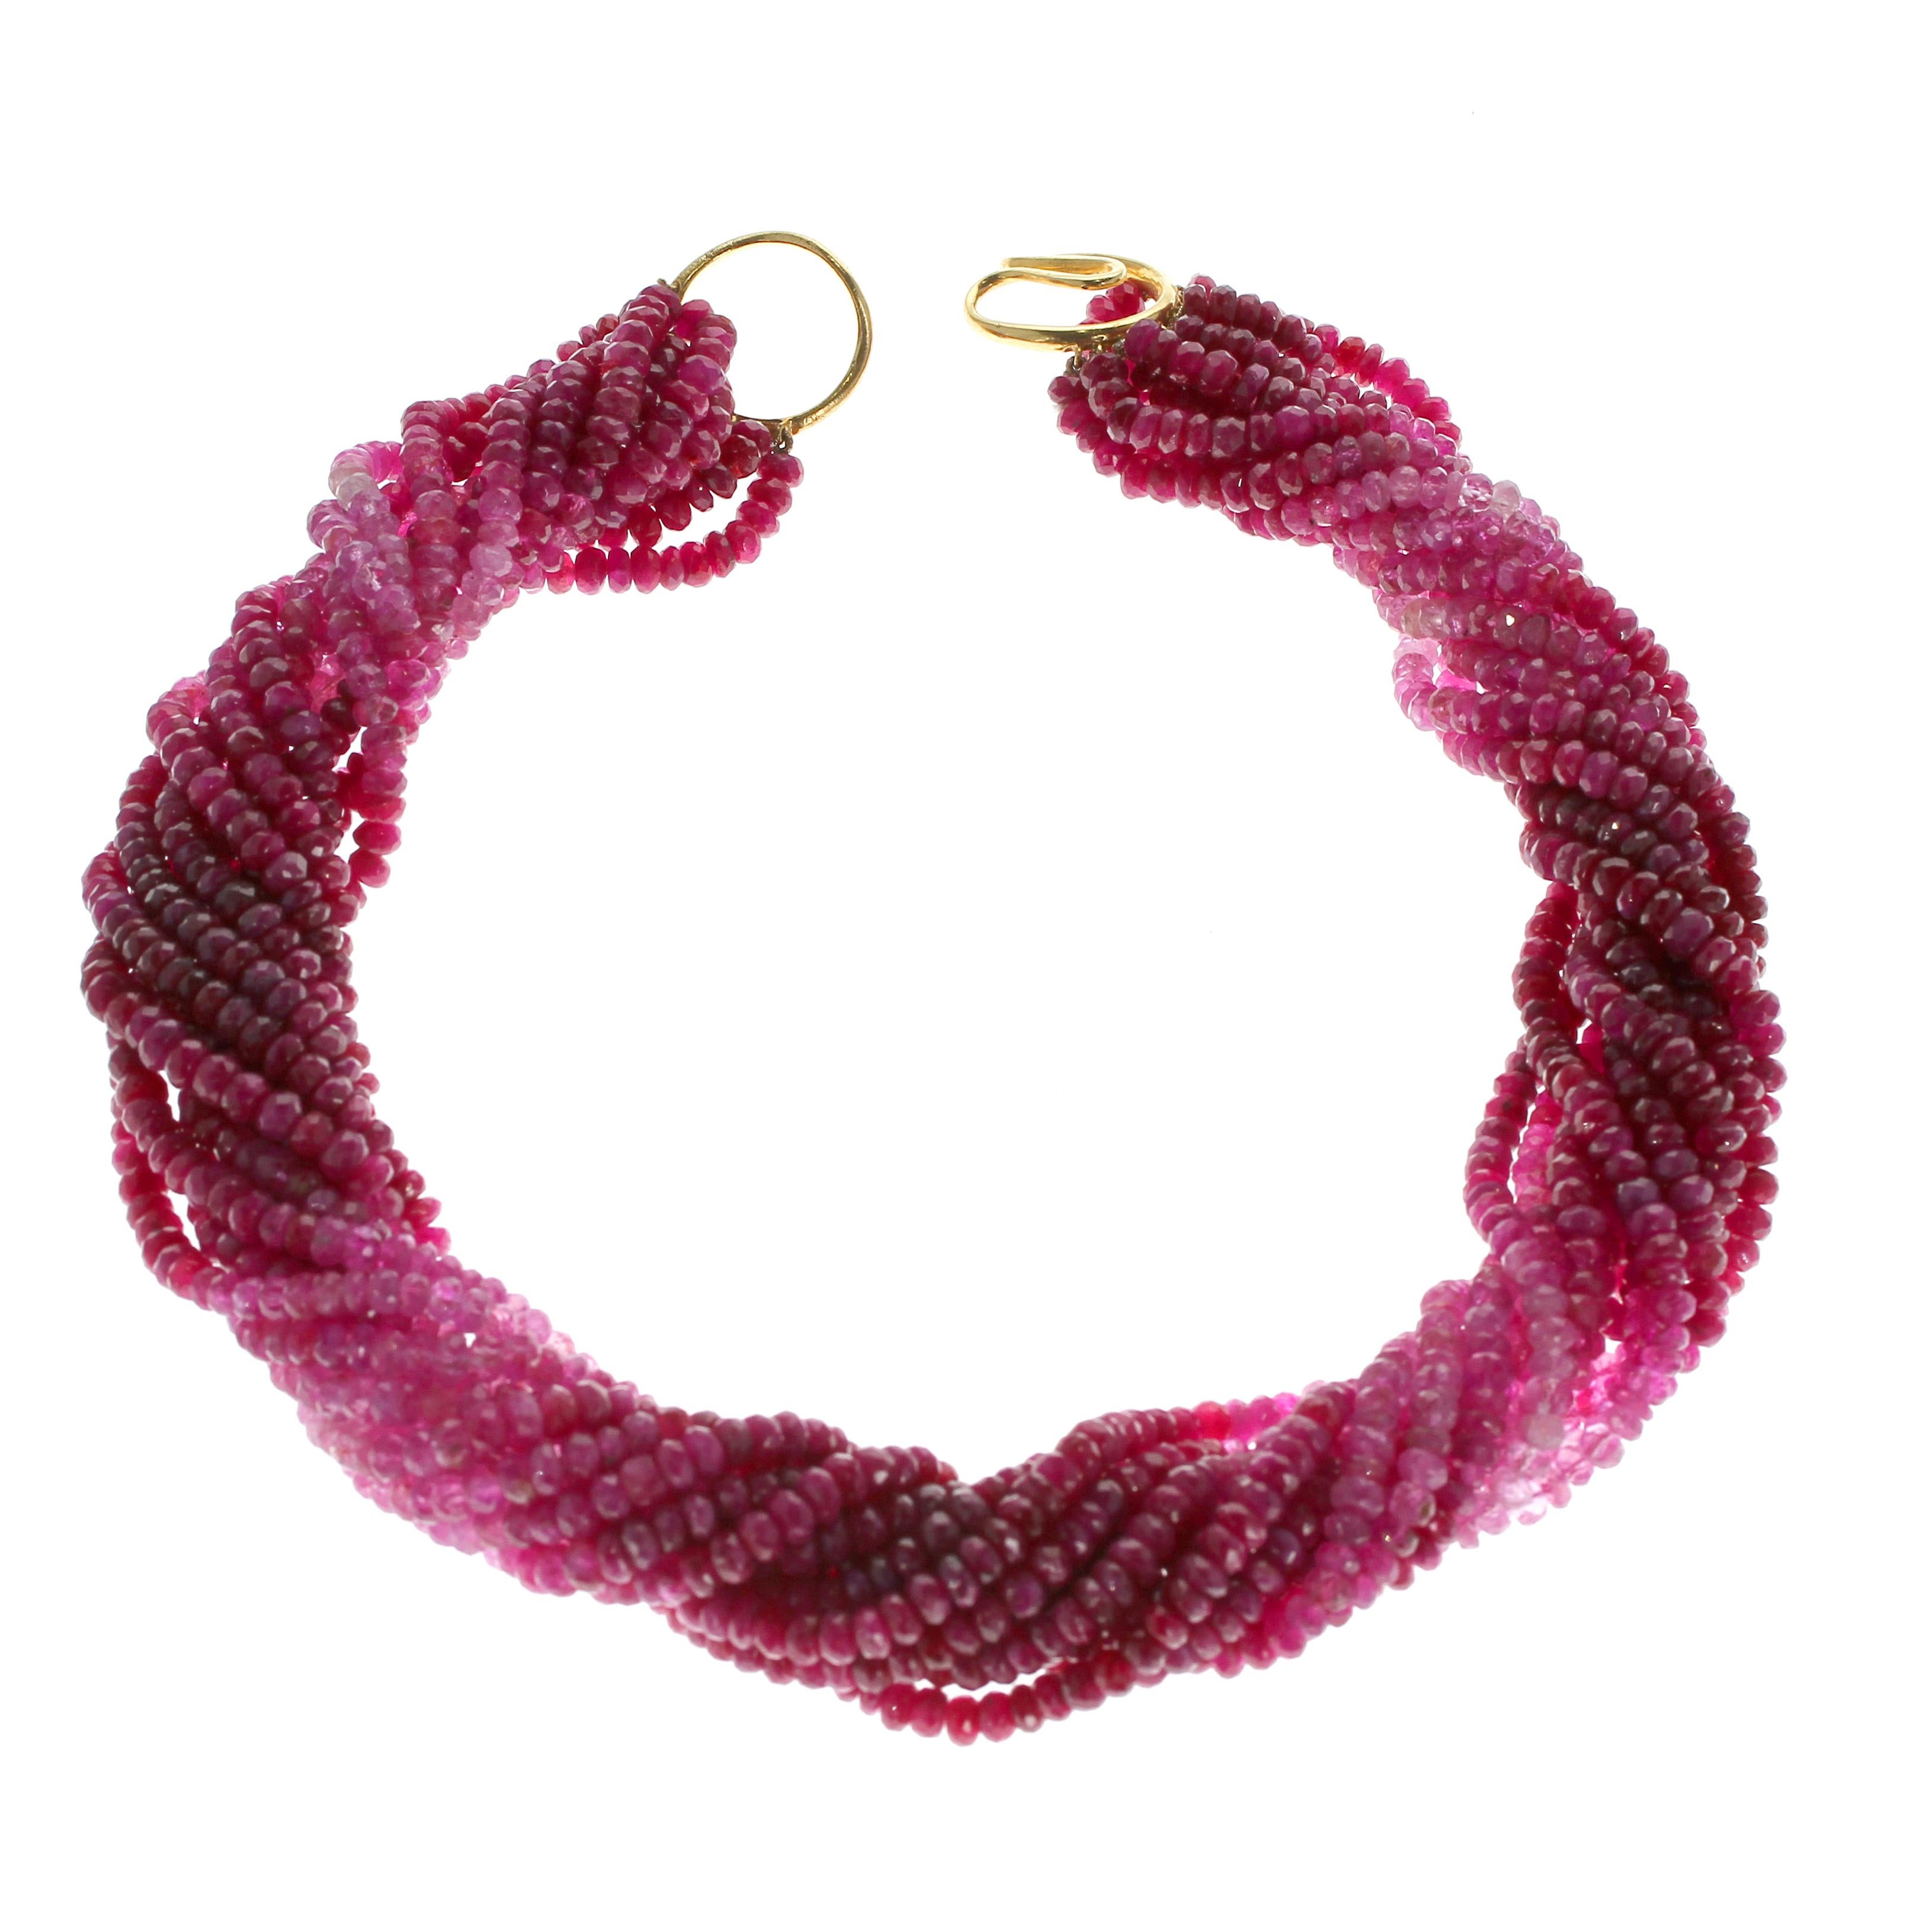 A ruby and pink sapphire bead necklace with an 18kt yellow gold clasp; the total weight of the necklace is approximately 988 carats, length 17.25 in.